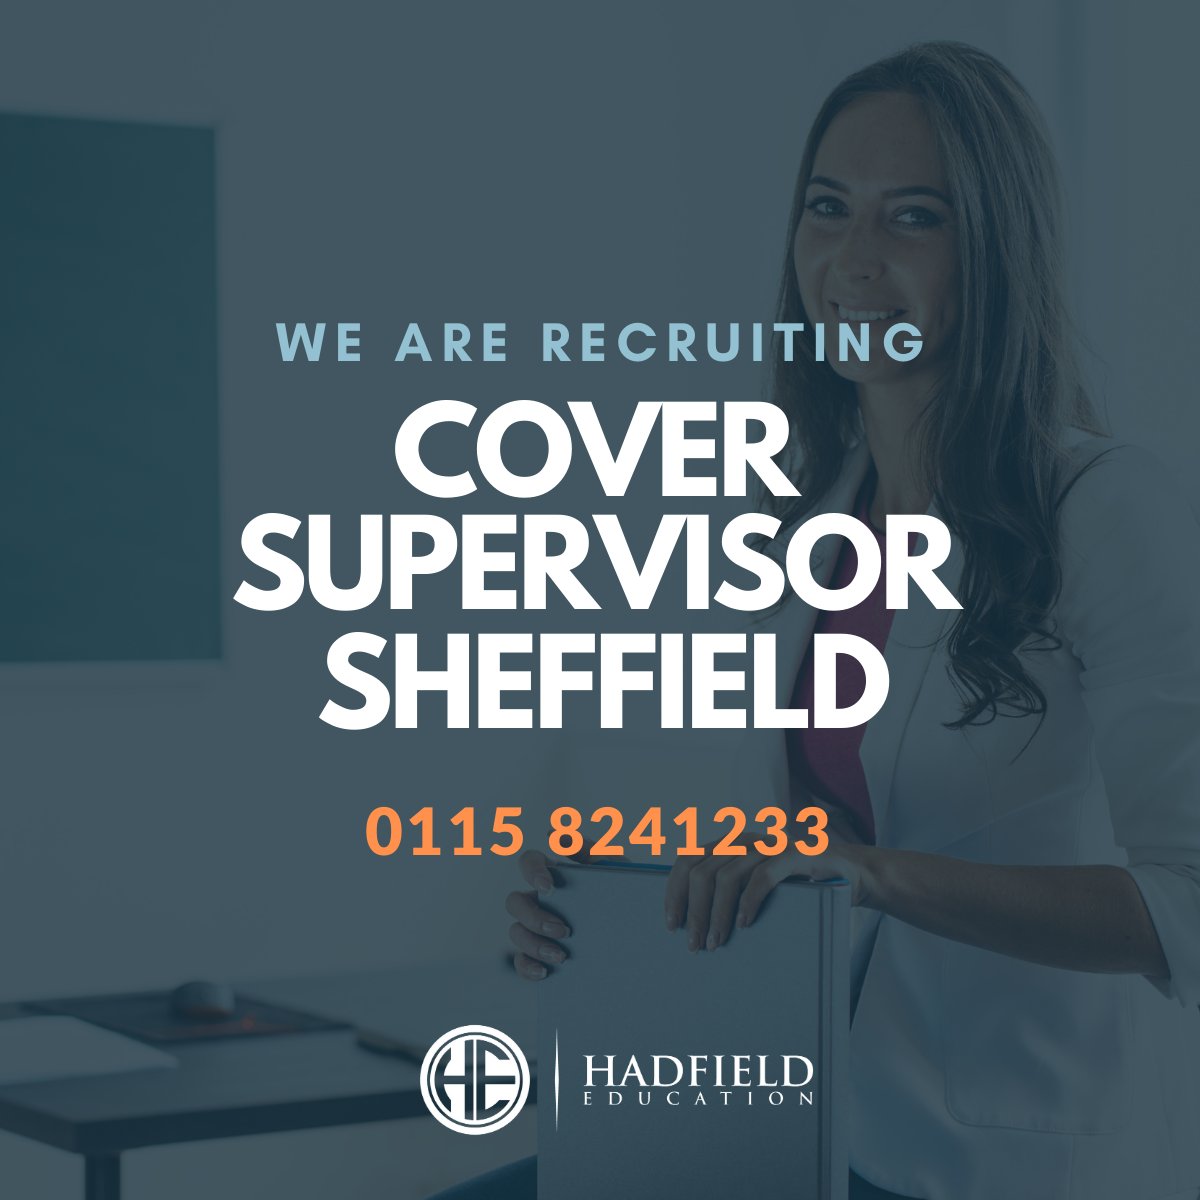 📢 We're hiring! 📢
Join our team as a Cover Supervisor in 📍Sheffield 🎓
Apply now and be part of our great team! 💼
#SheffieldJobs #TeachingJobs #CoverSupervisorJobs 🚀 
bit.ly/3OS5WYX